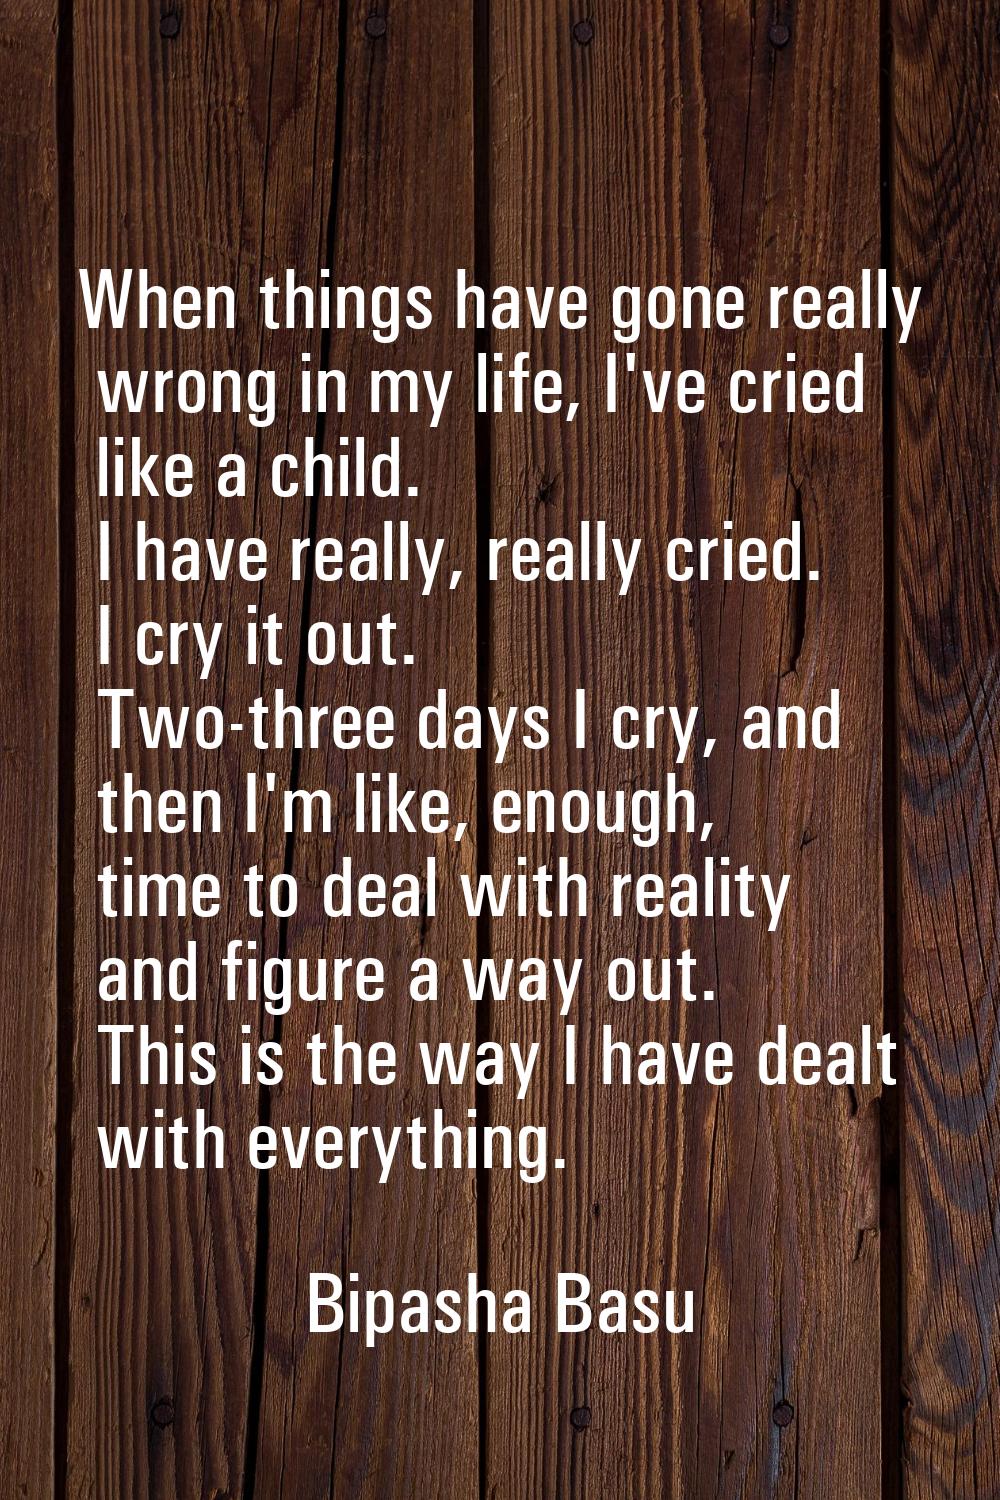 When things have gone really wrong in my life, I've cried like a child. I have really, really cried